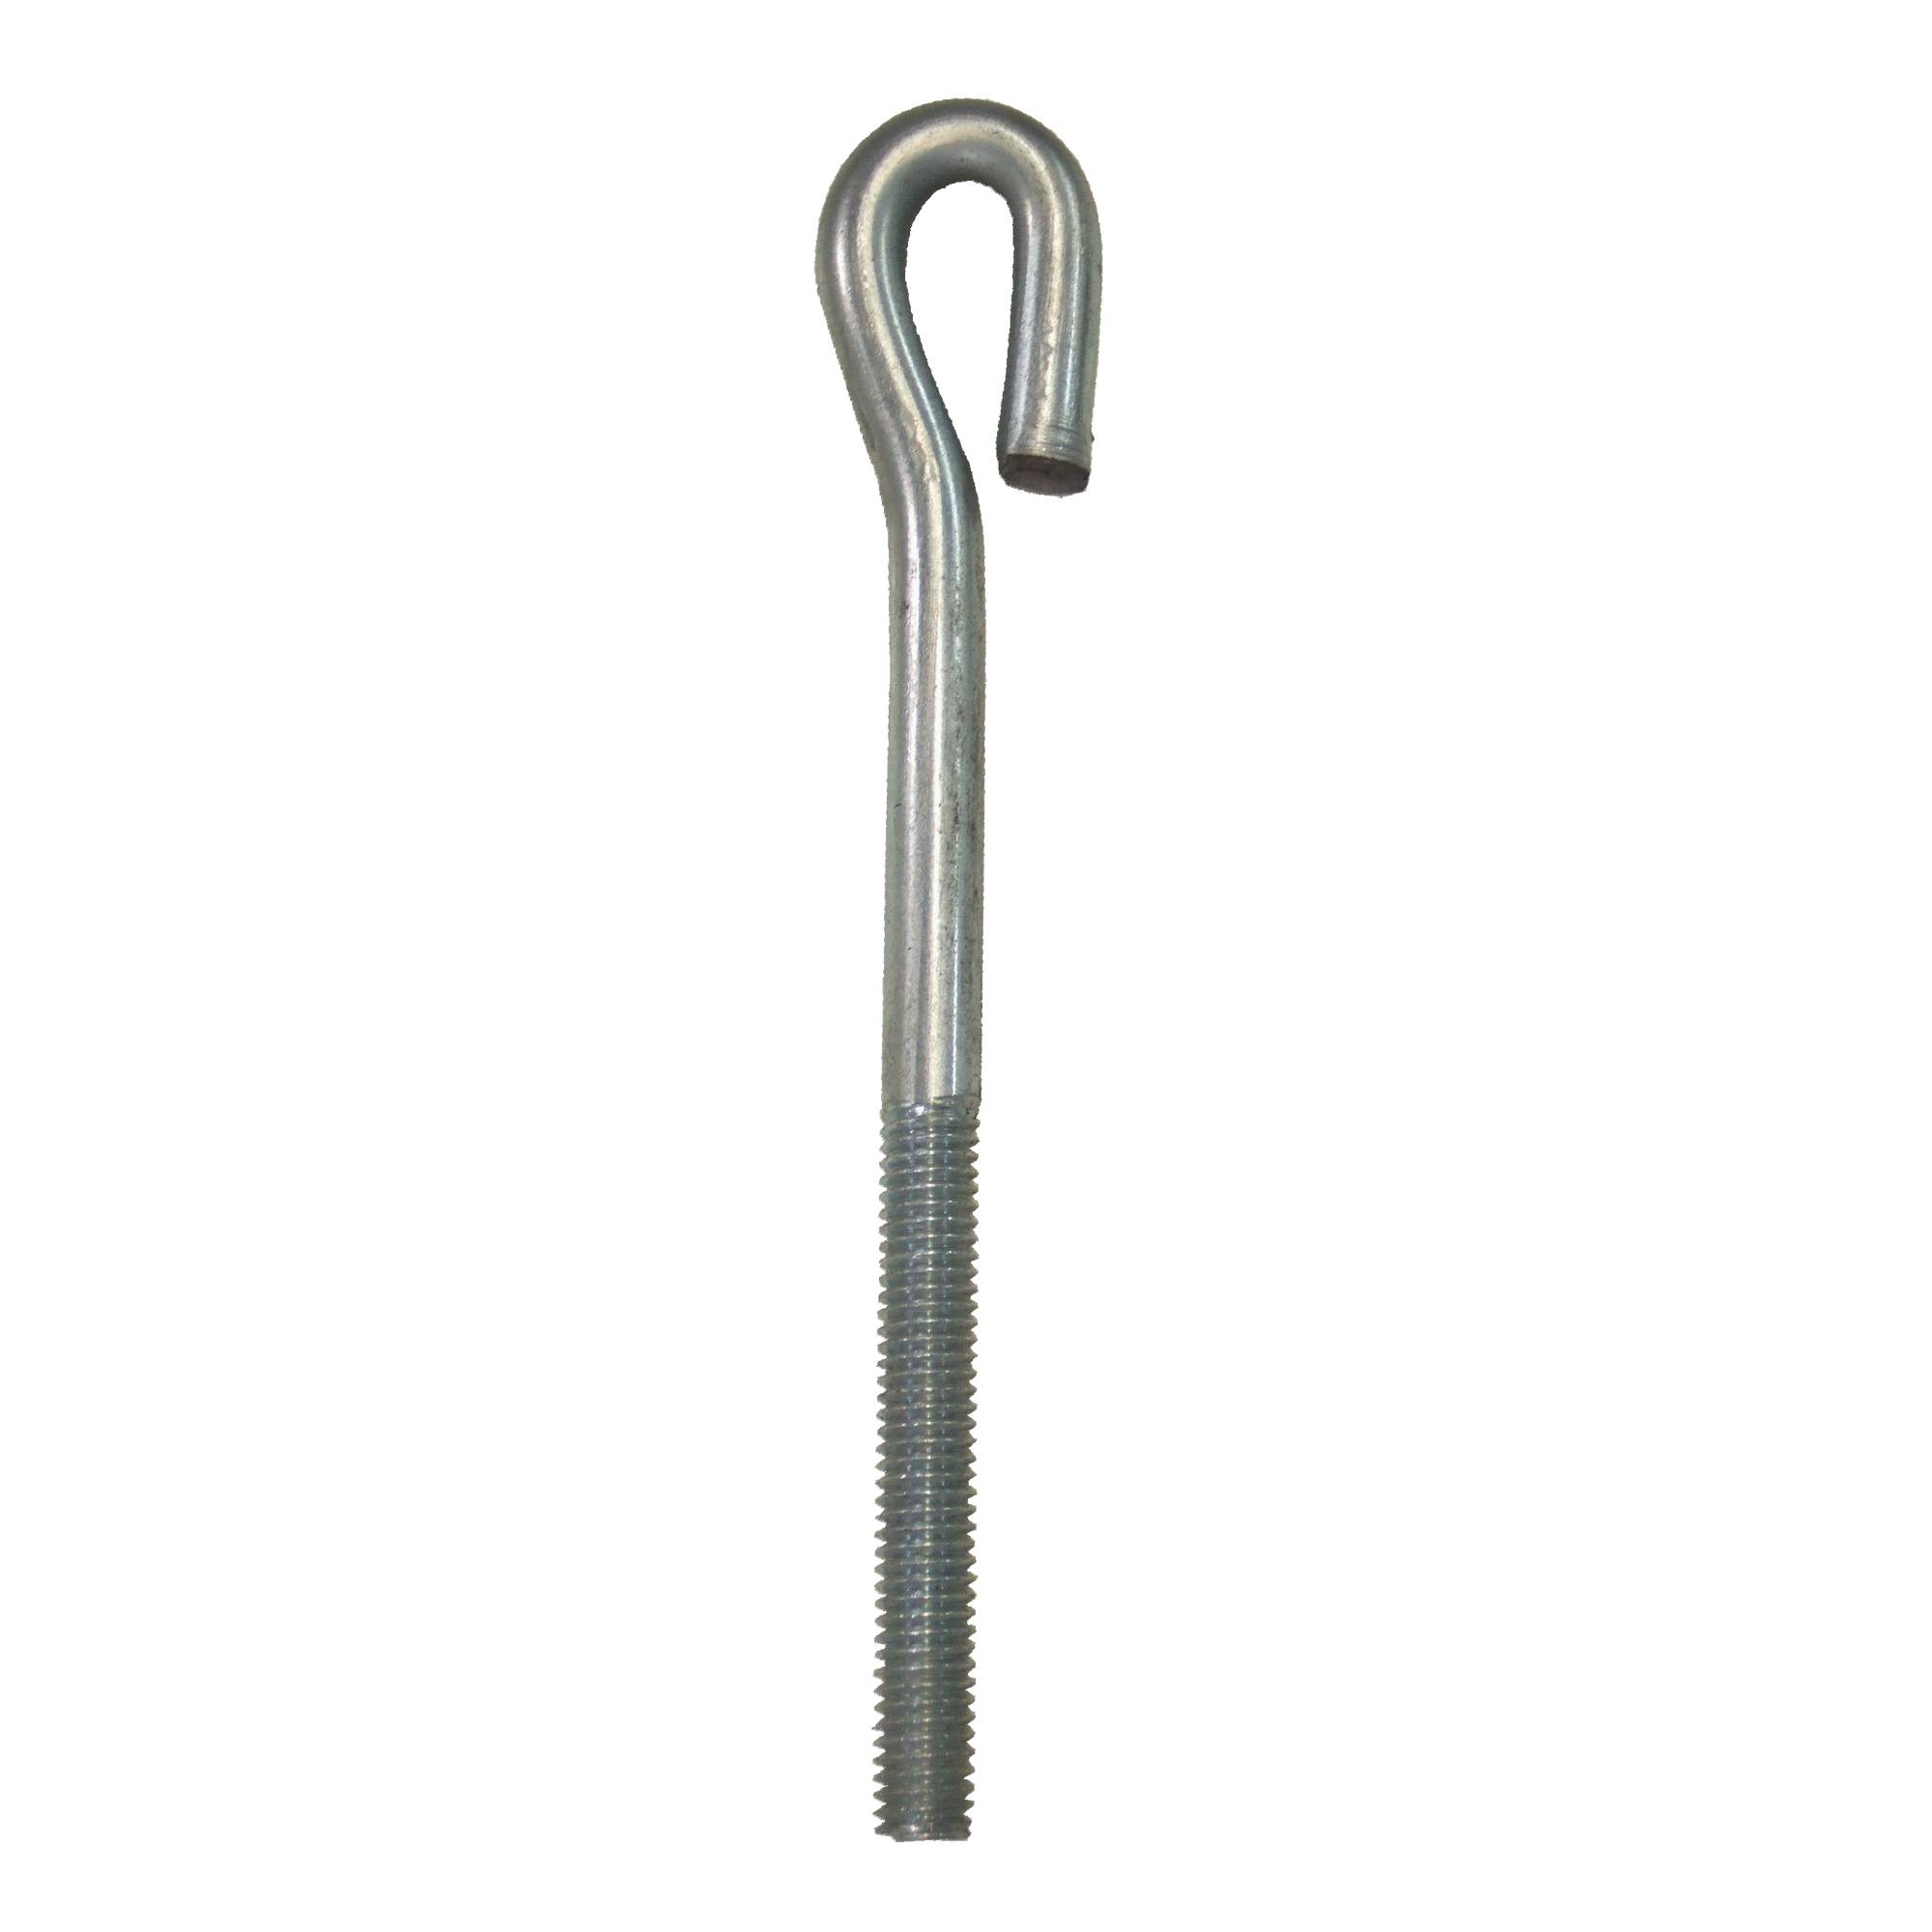 3/8 threaded rod with hook, 6-3/4 long